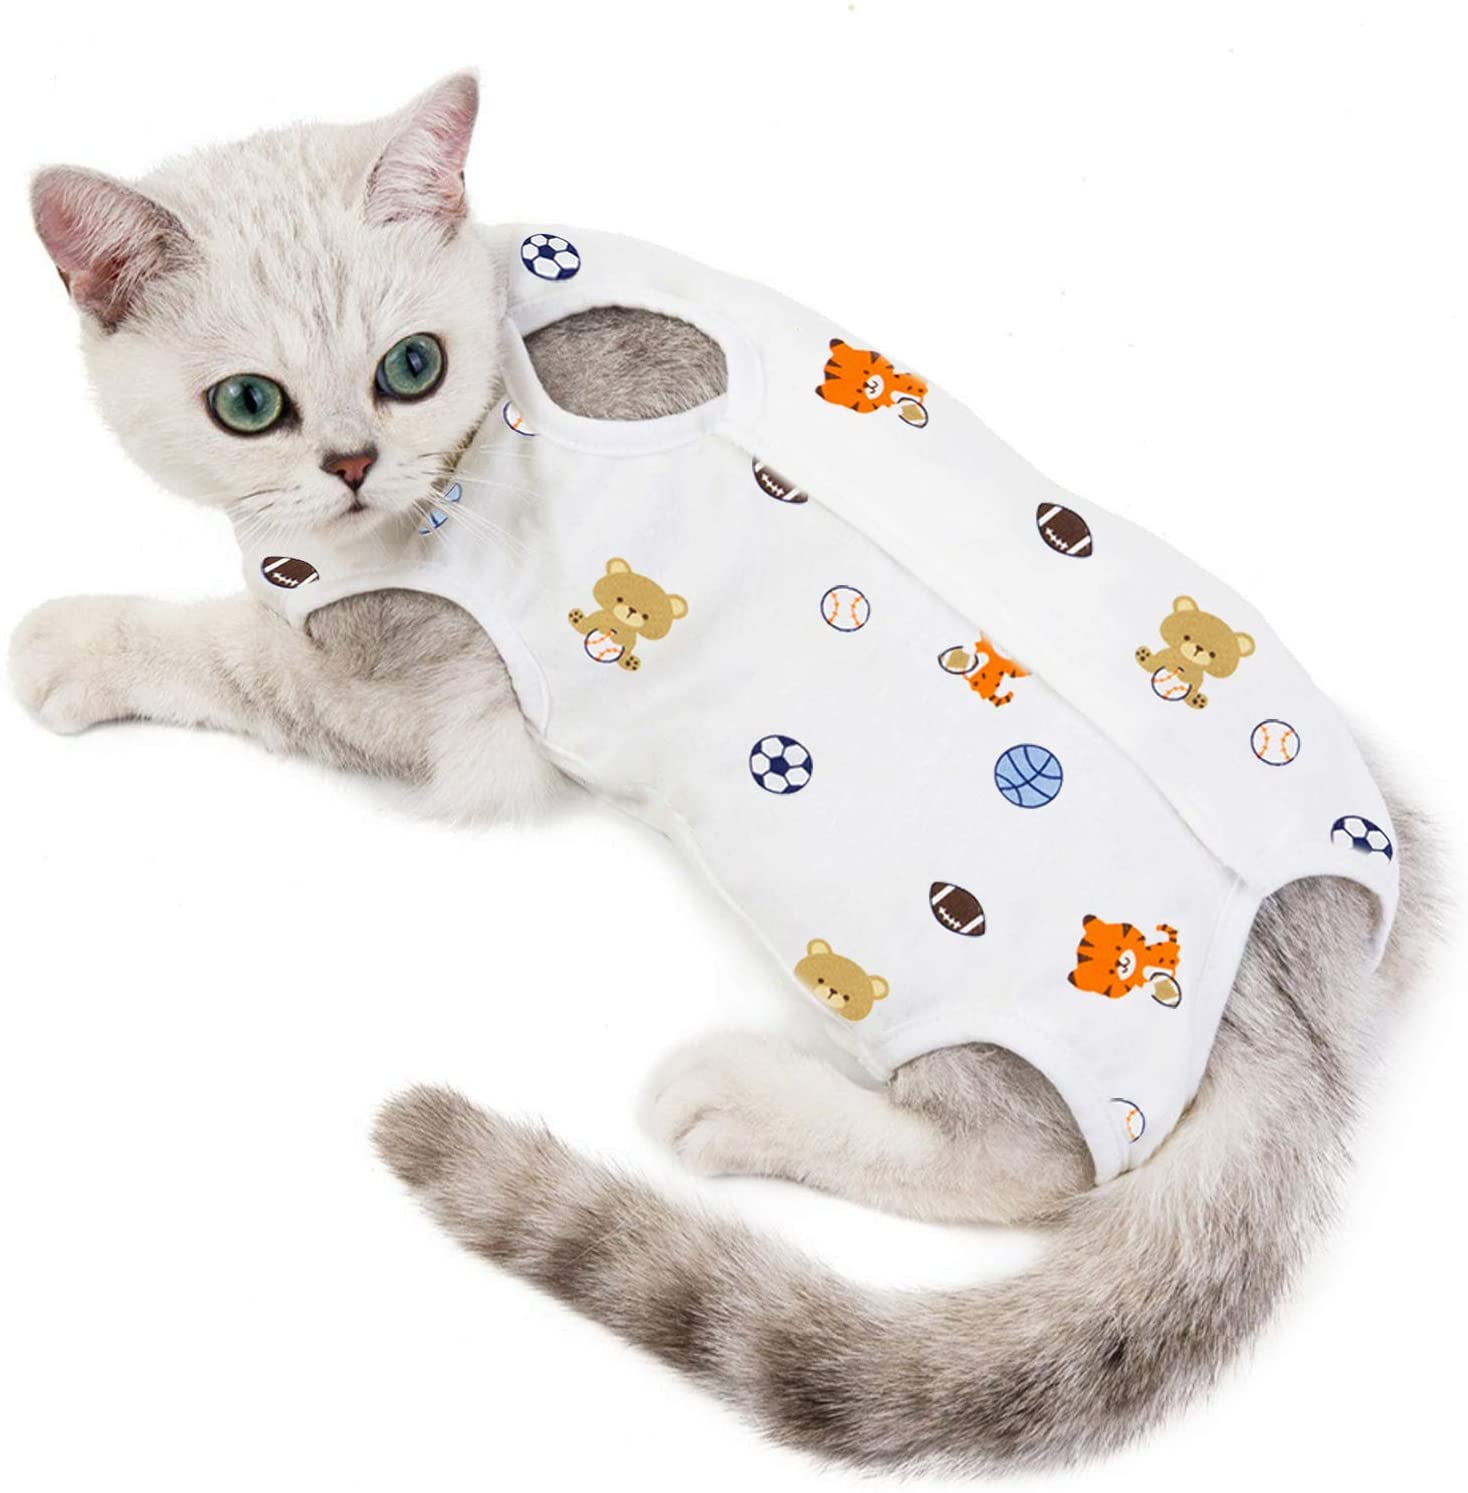 E-Collar Alternative for Cats and Dogs After Surgery Wear Cat Professional Recovery Suit for Abdominal Wounds or Skin Diseases Pajama Suit 